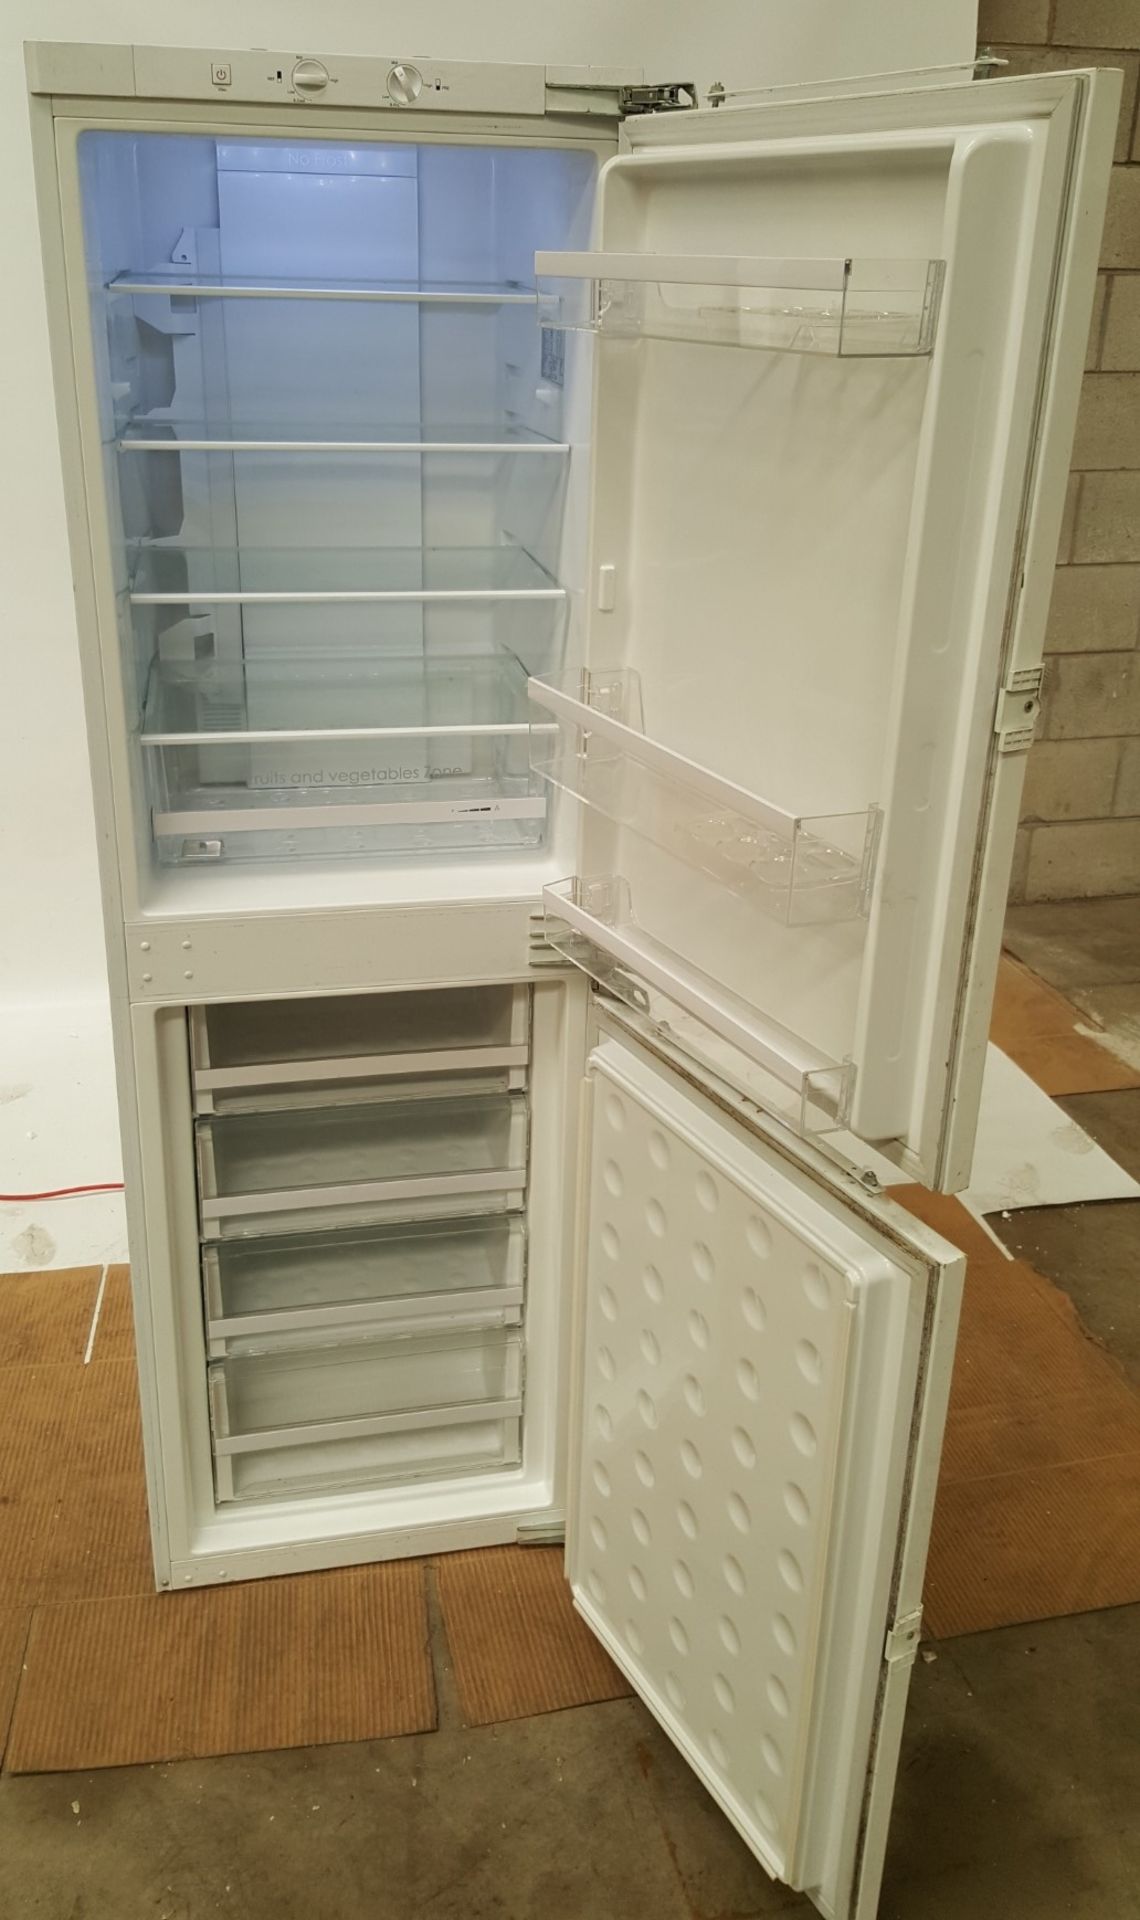 1 x Prima Integrated 50/50 Frost Free Fridge Freezer LPR475A1 - Ref BY188 - Image 7 of 8